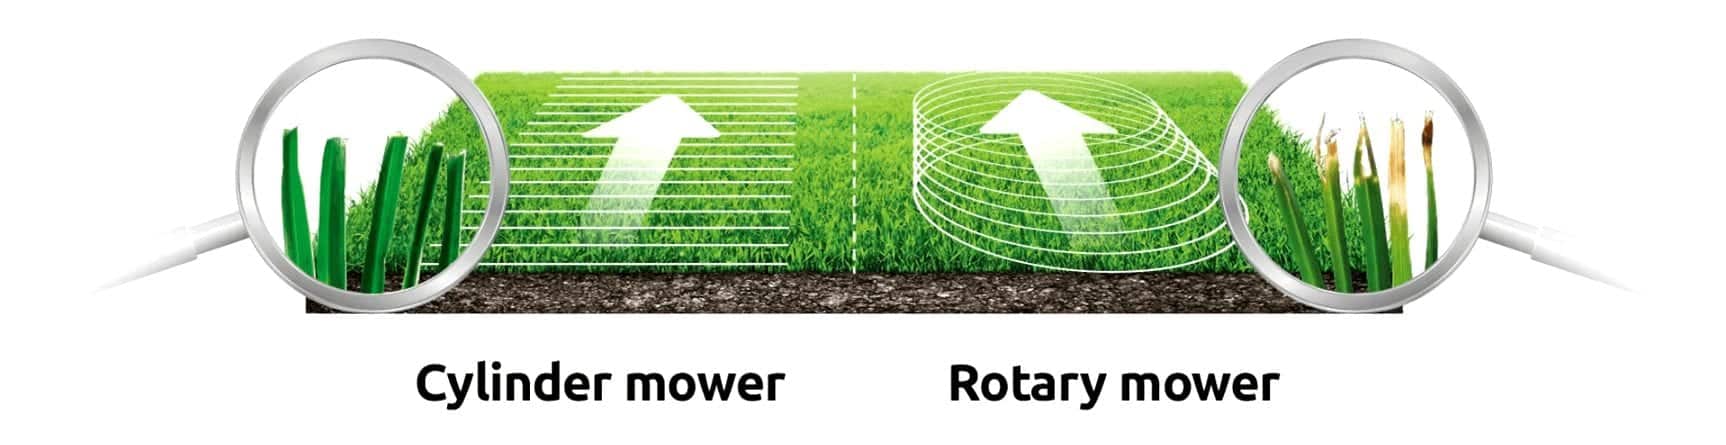 difference between cylinder and rotary mower diagram